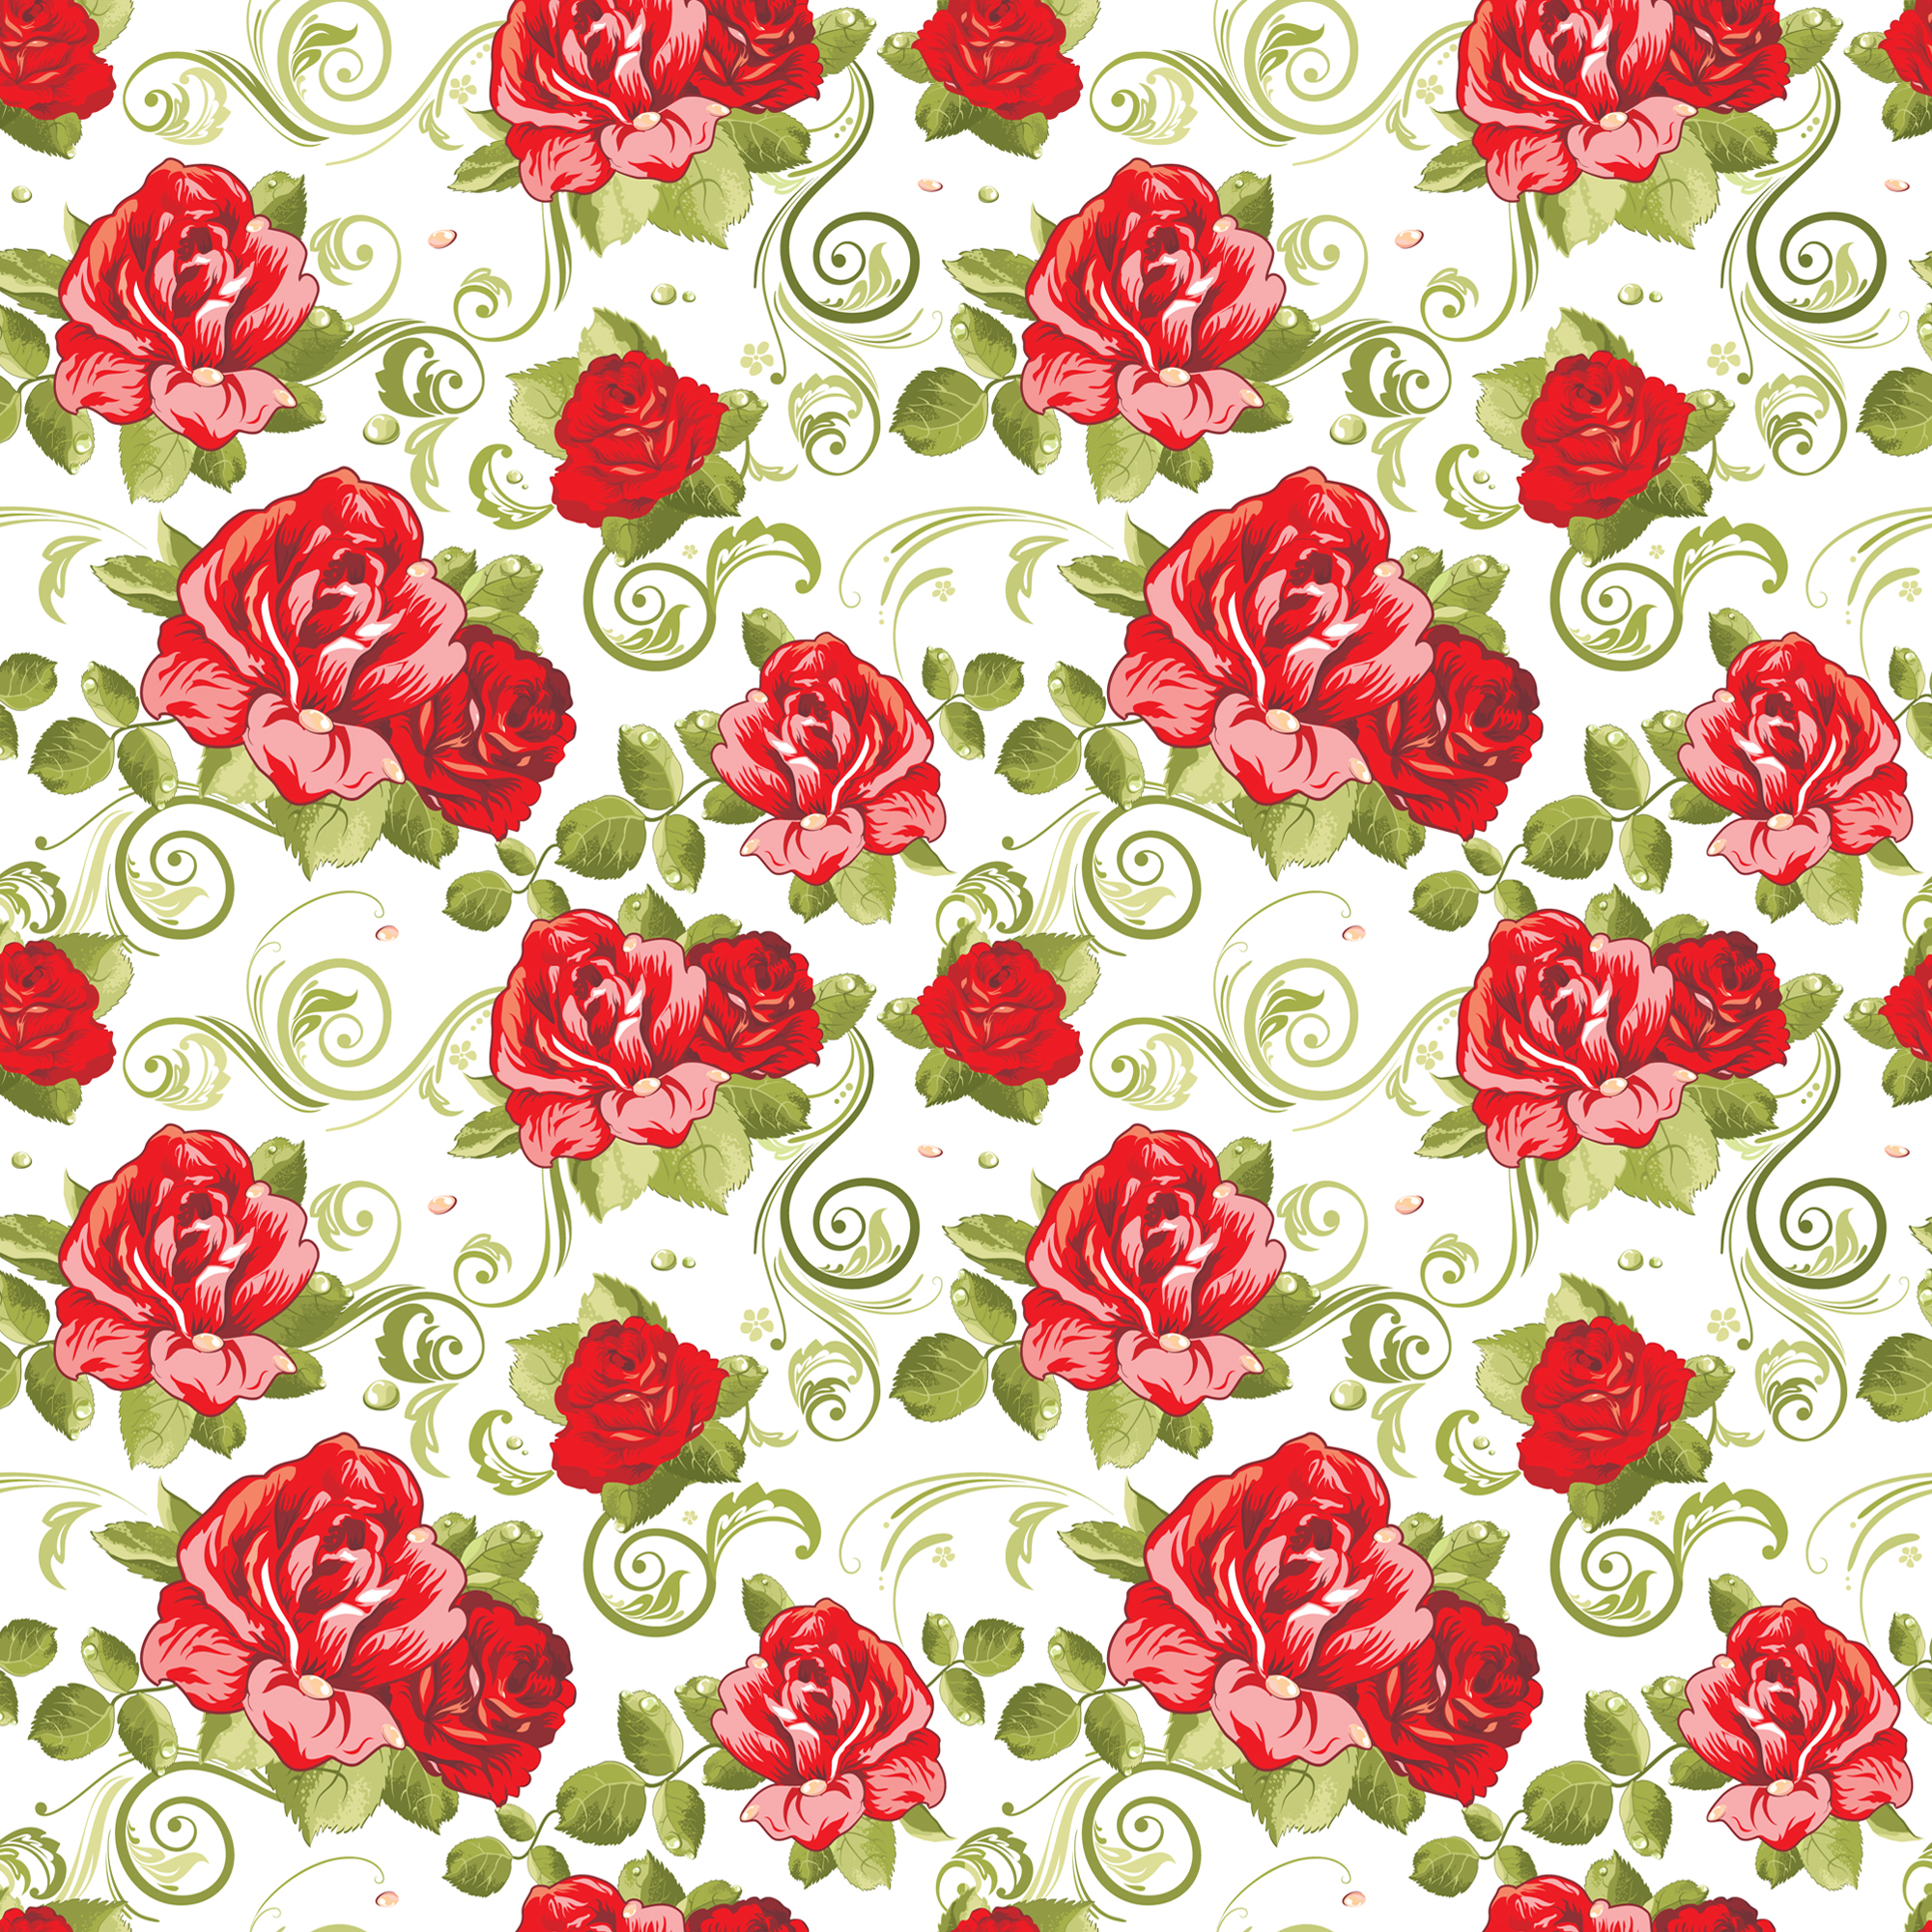 background, pictures, roses, flowers, patterns Full HD